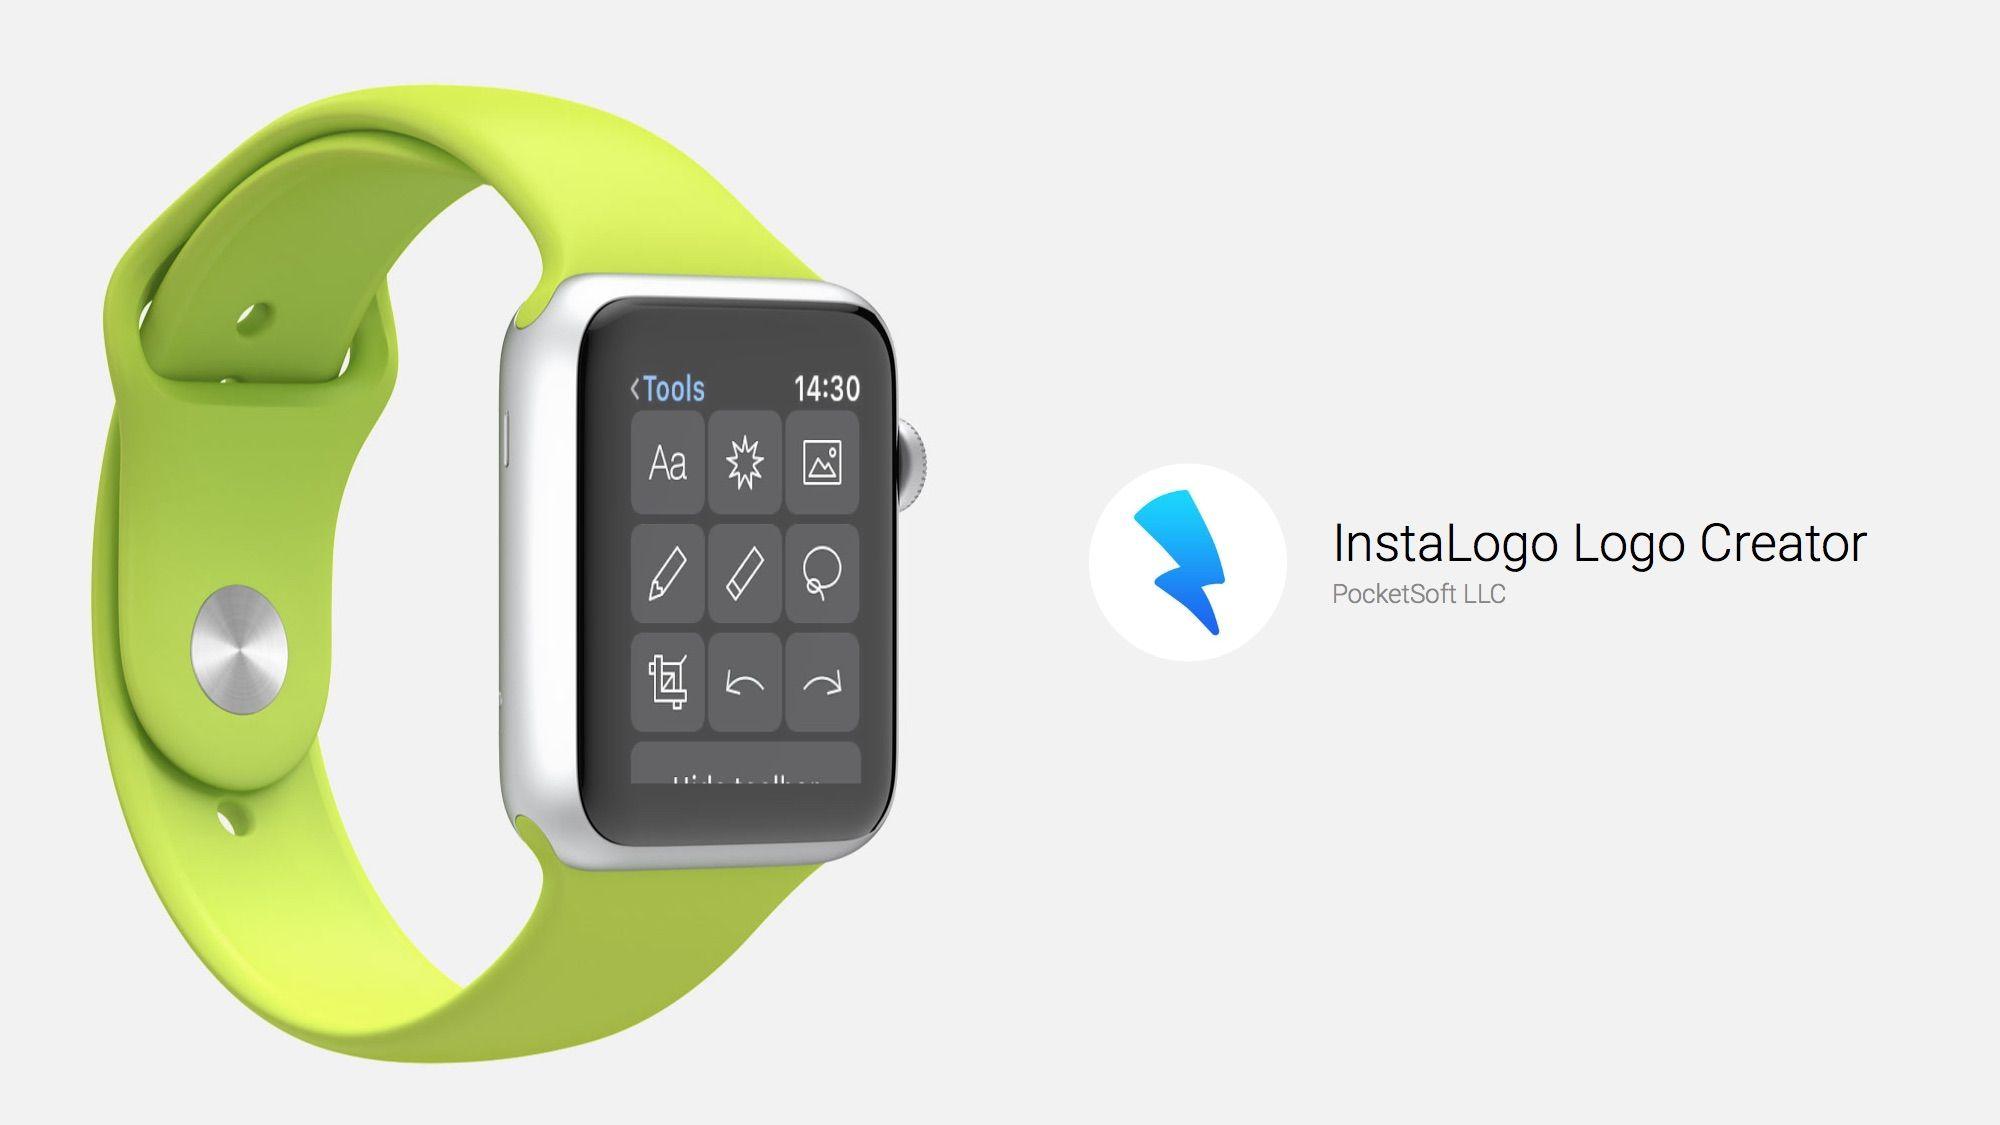 Instalogo Logo - Use Your Apple Watch As a Second Display With InstaLogo